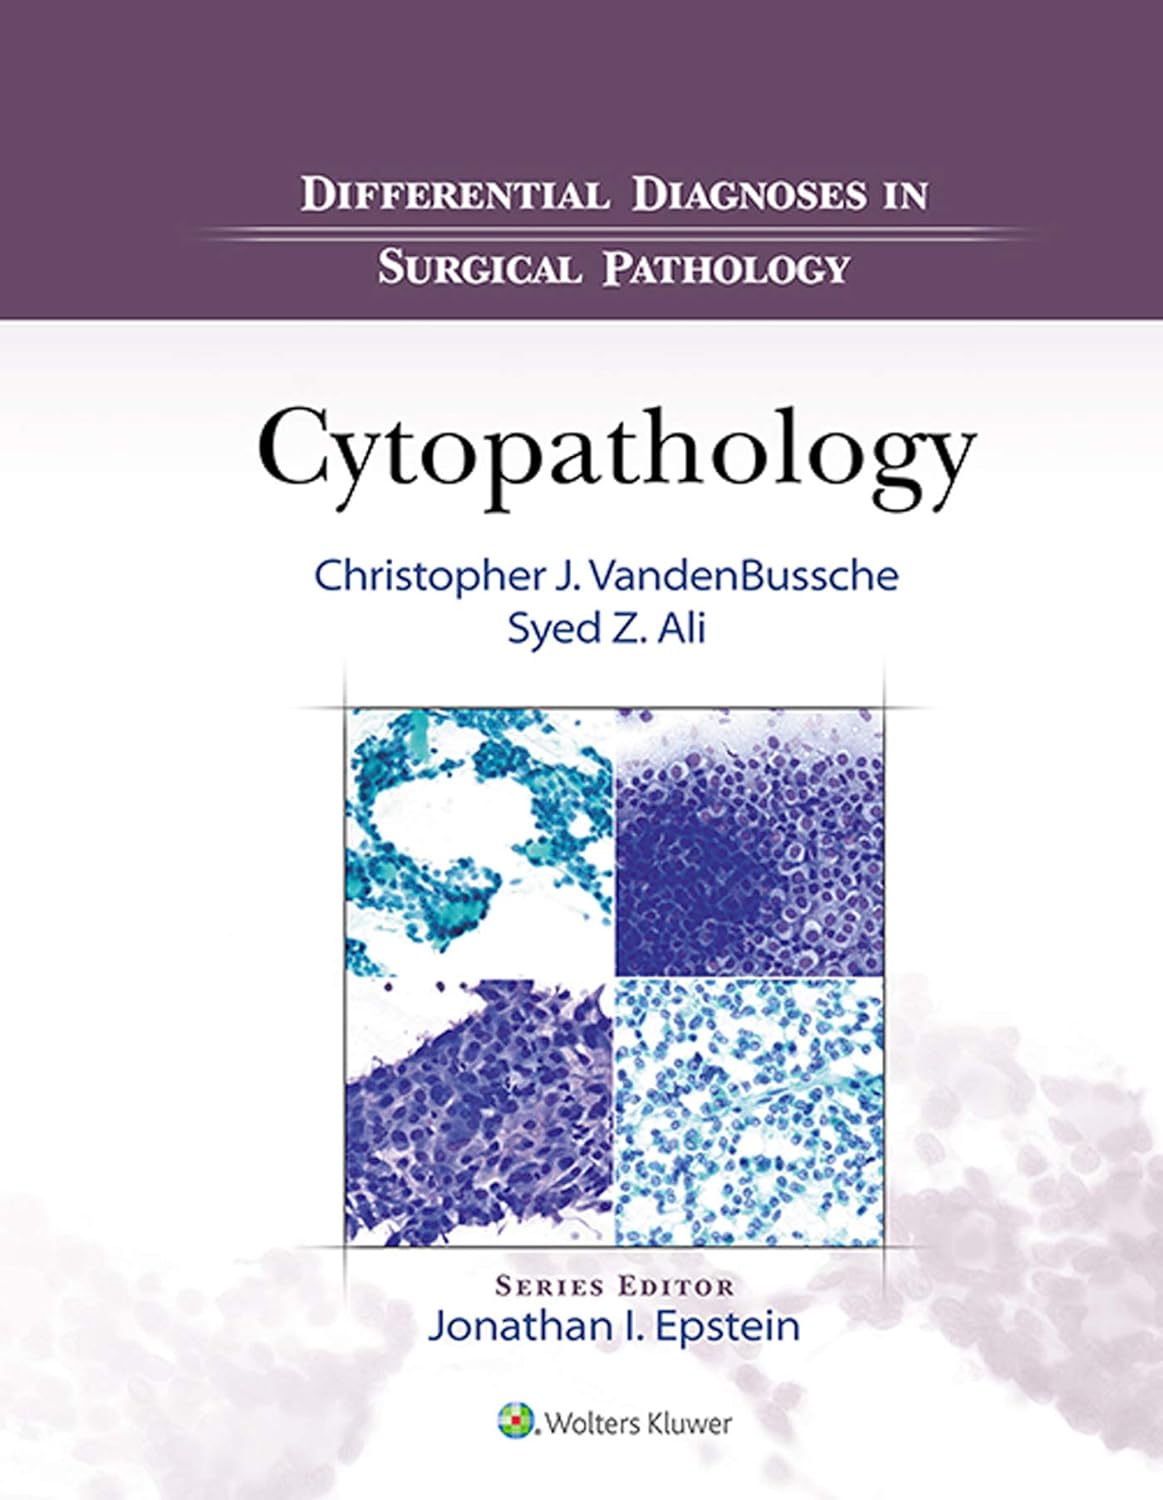 Differential Diagnoses in Surgical Pathology: Cytopathology 1st Edition, Kindle Edition